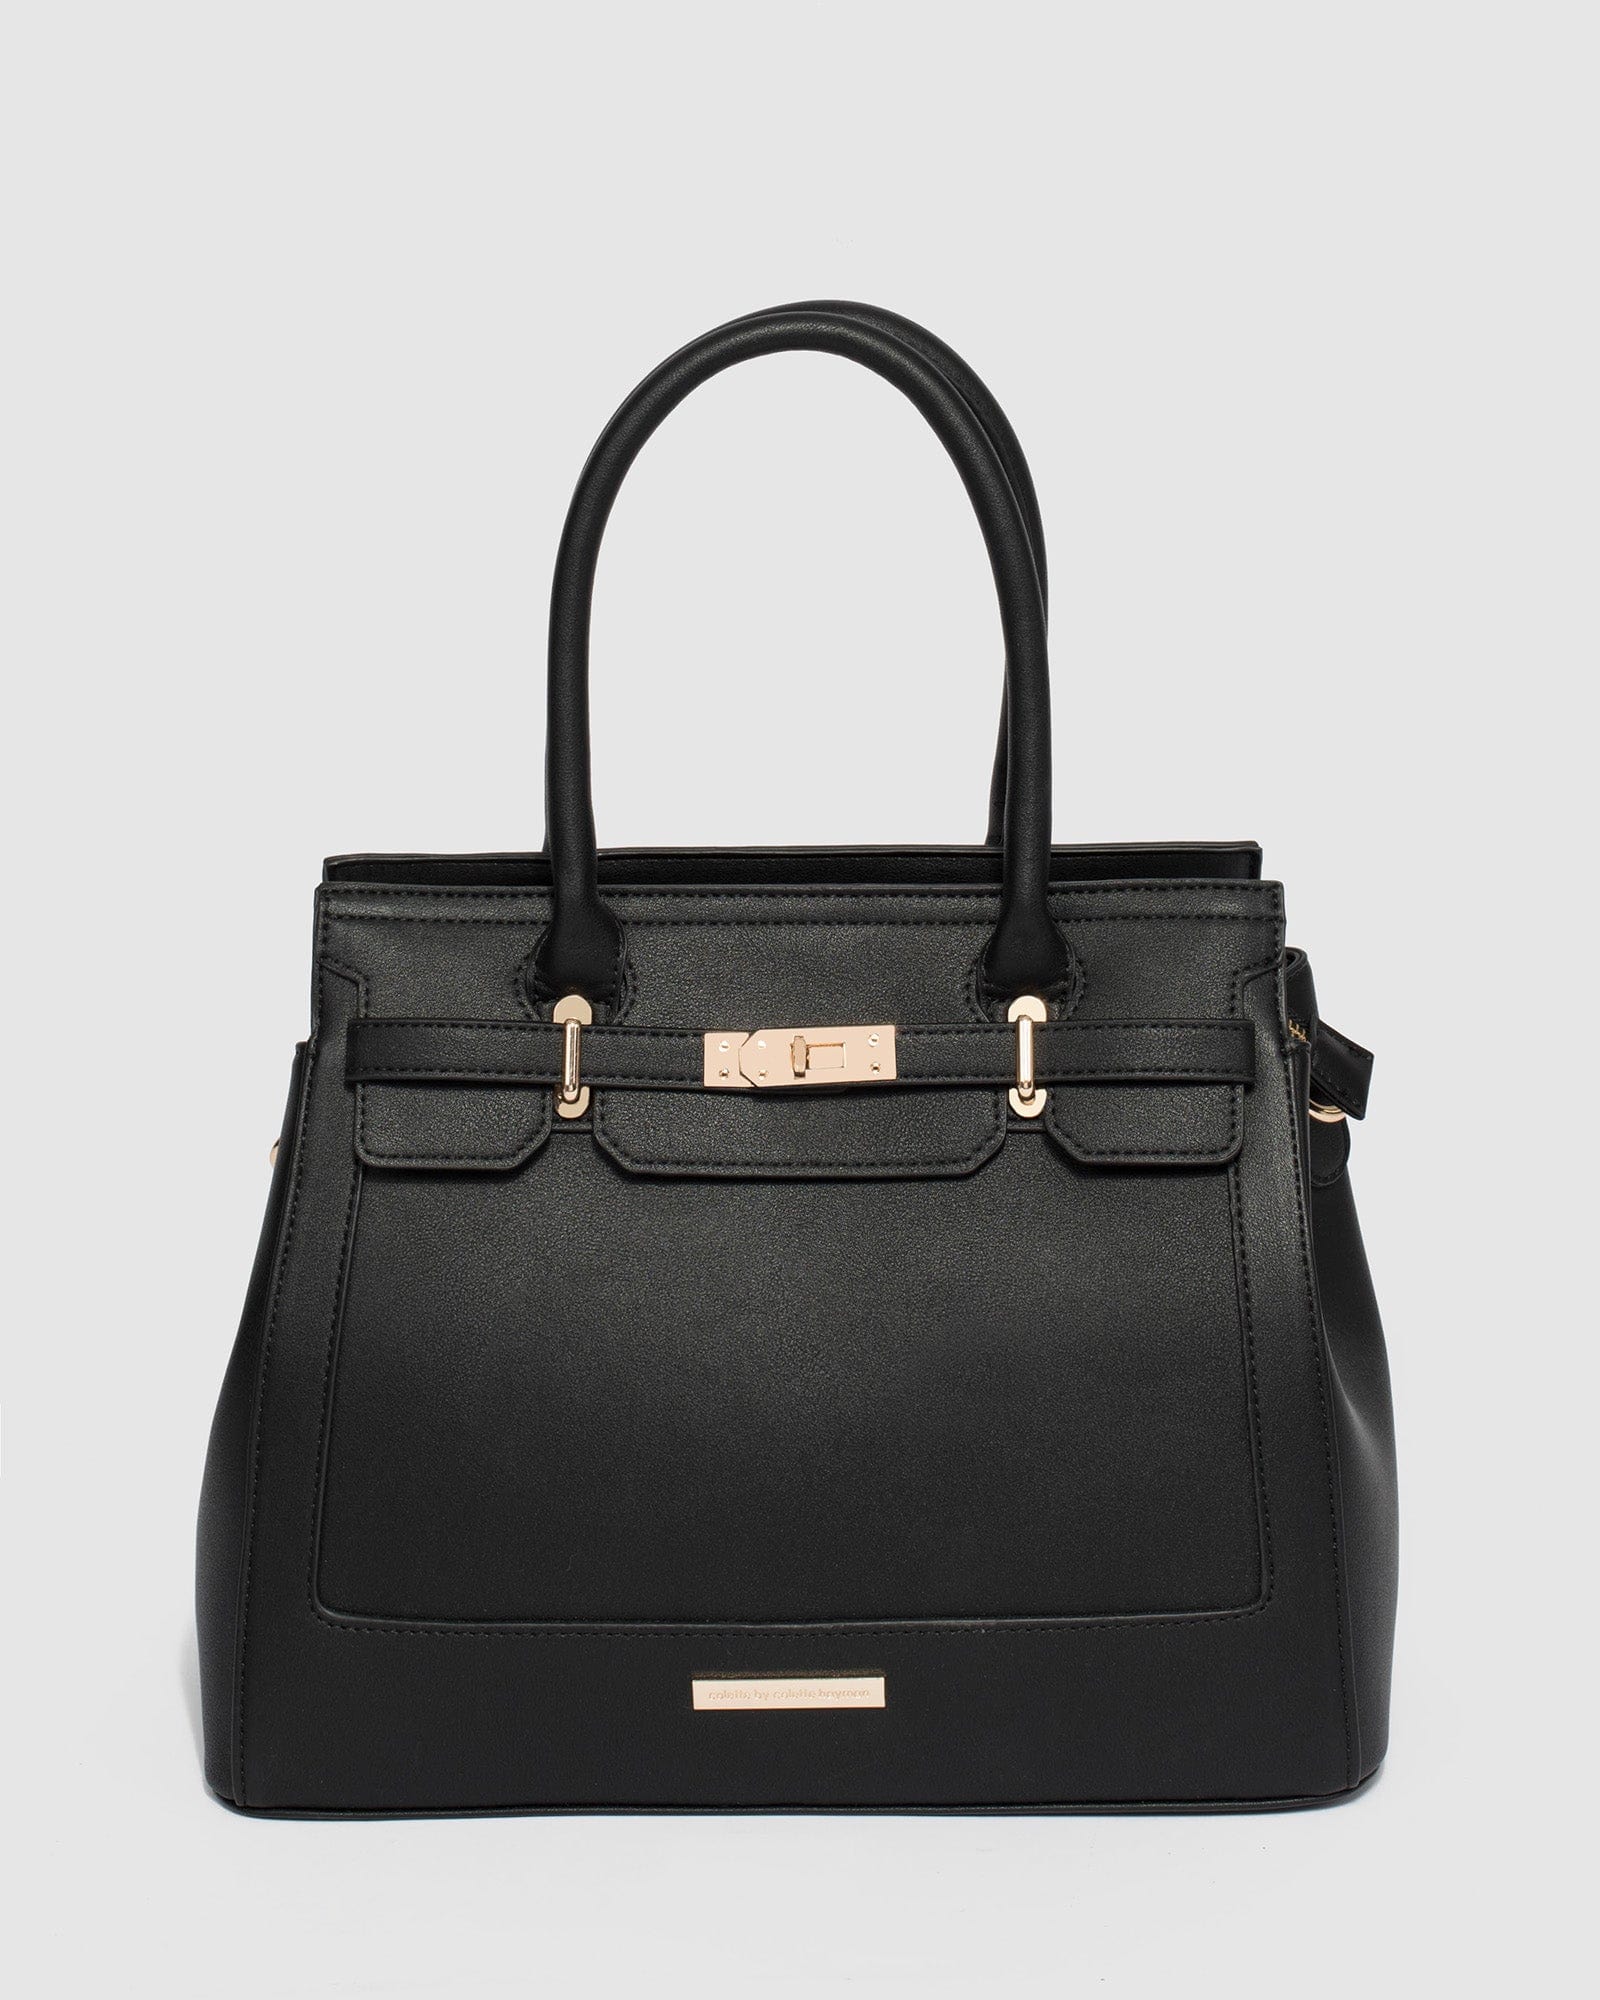 New Arrivals | Handbags & Accessories – Tagged 